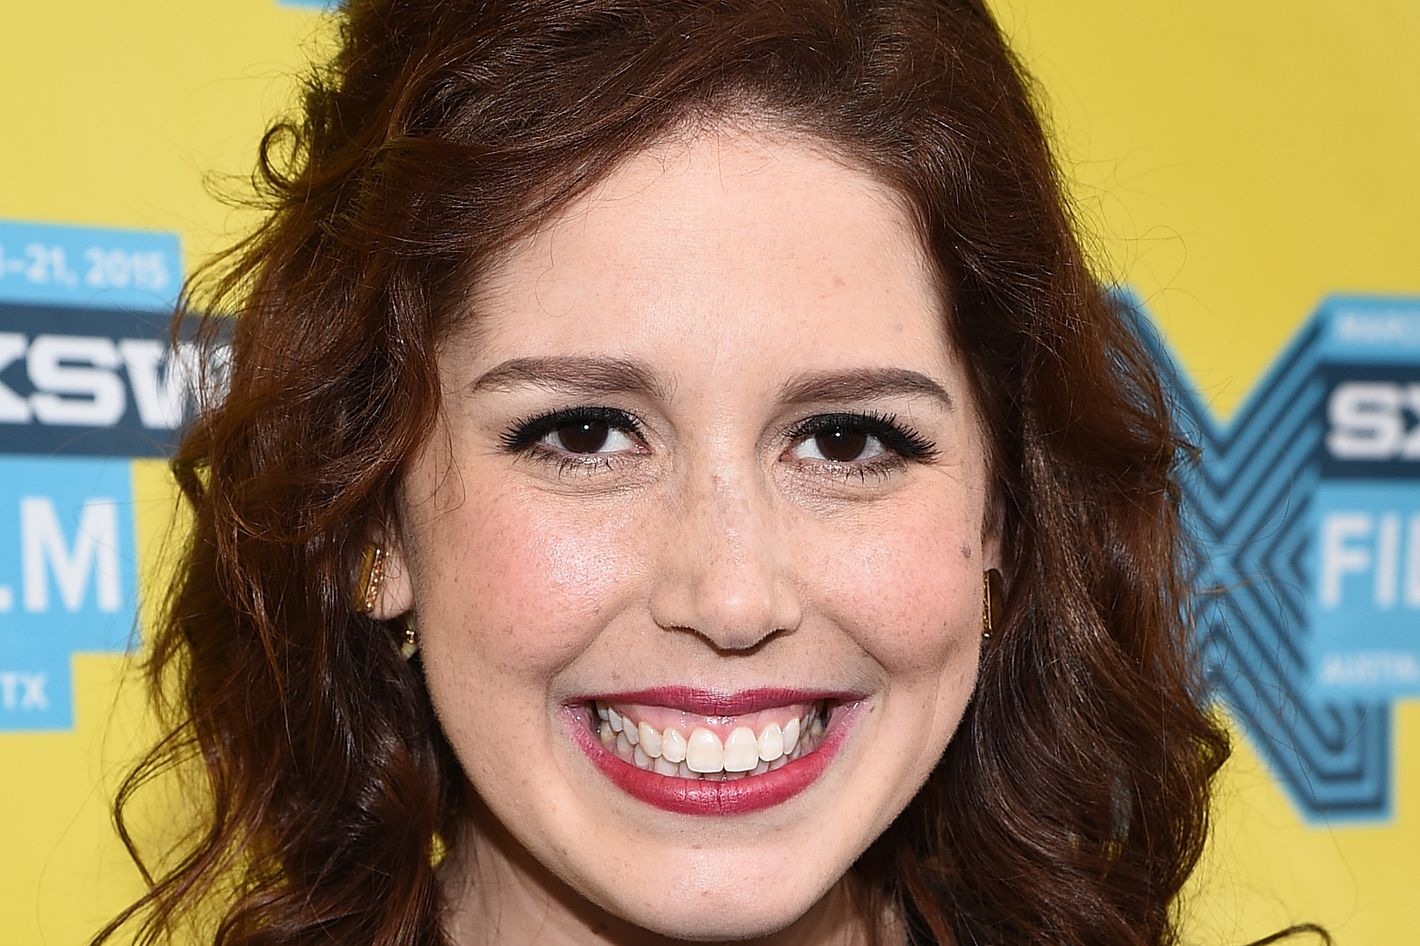 How Rich is Vanessa Bayer